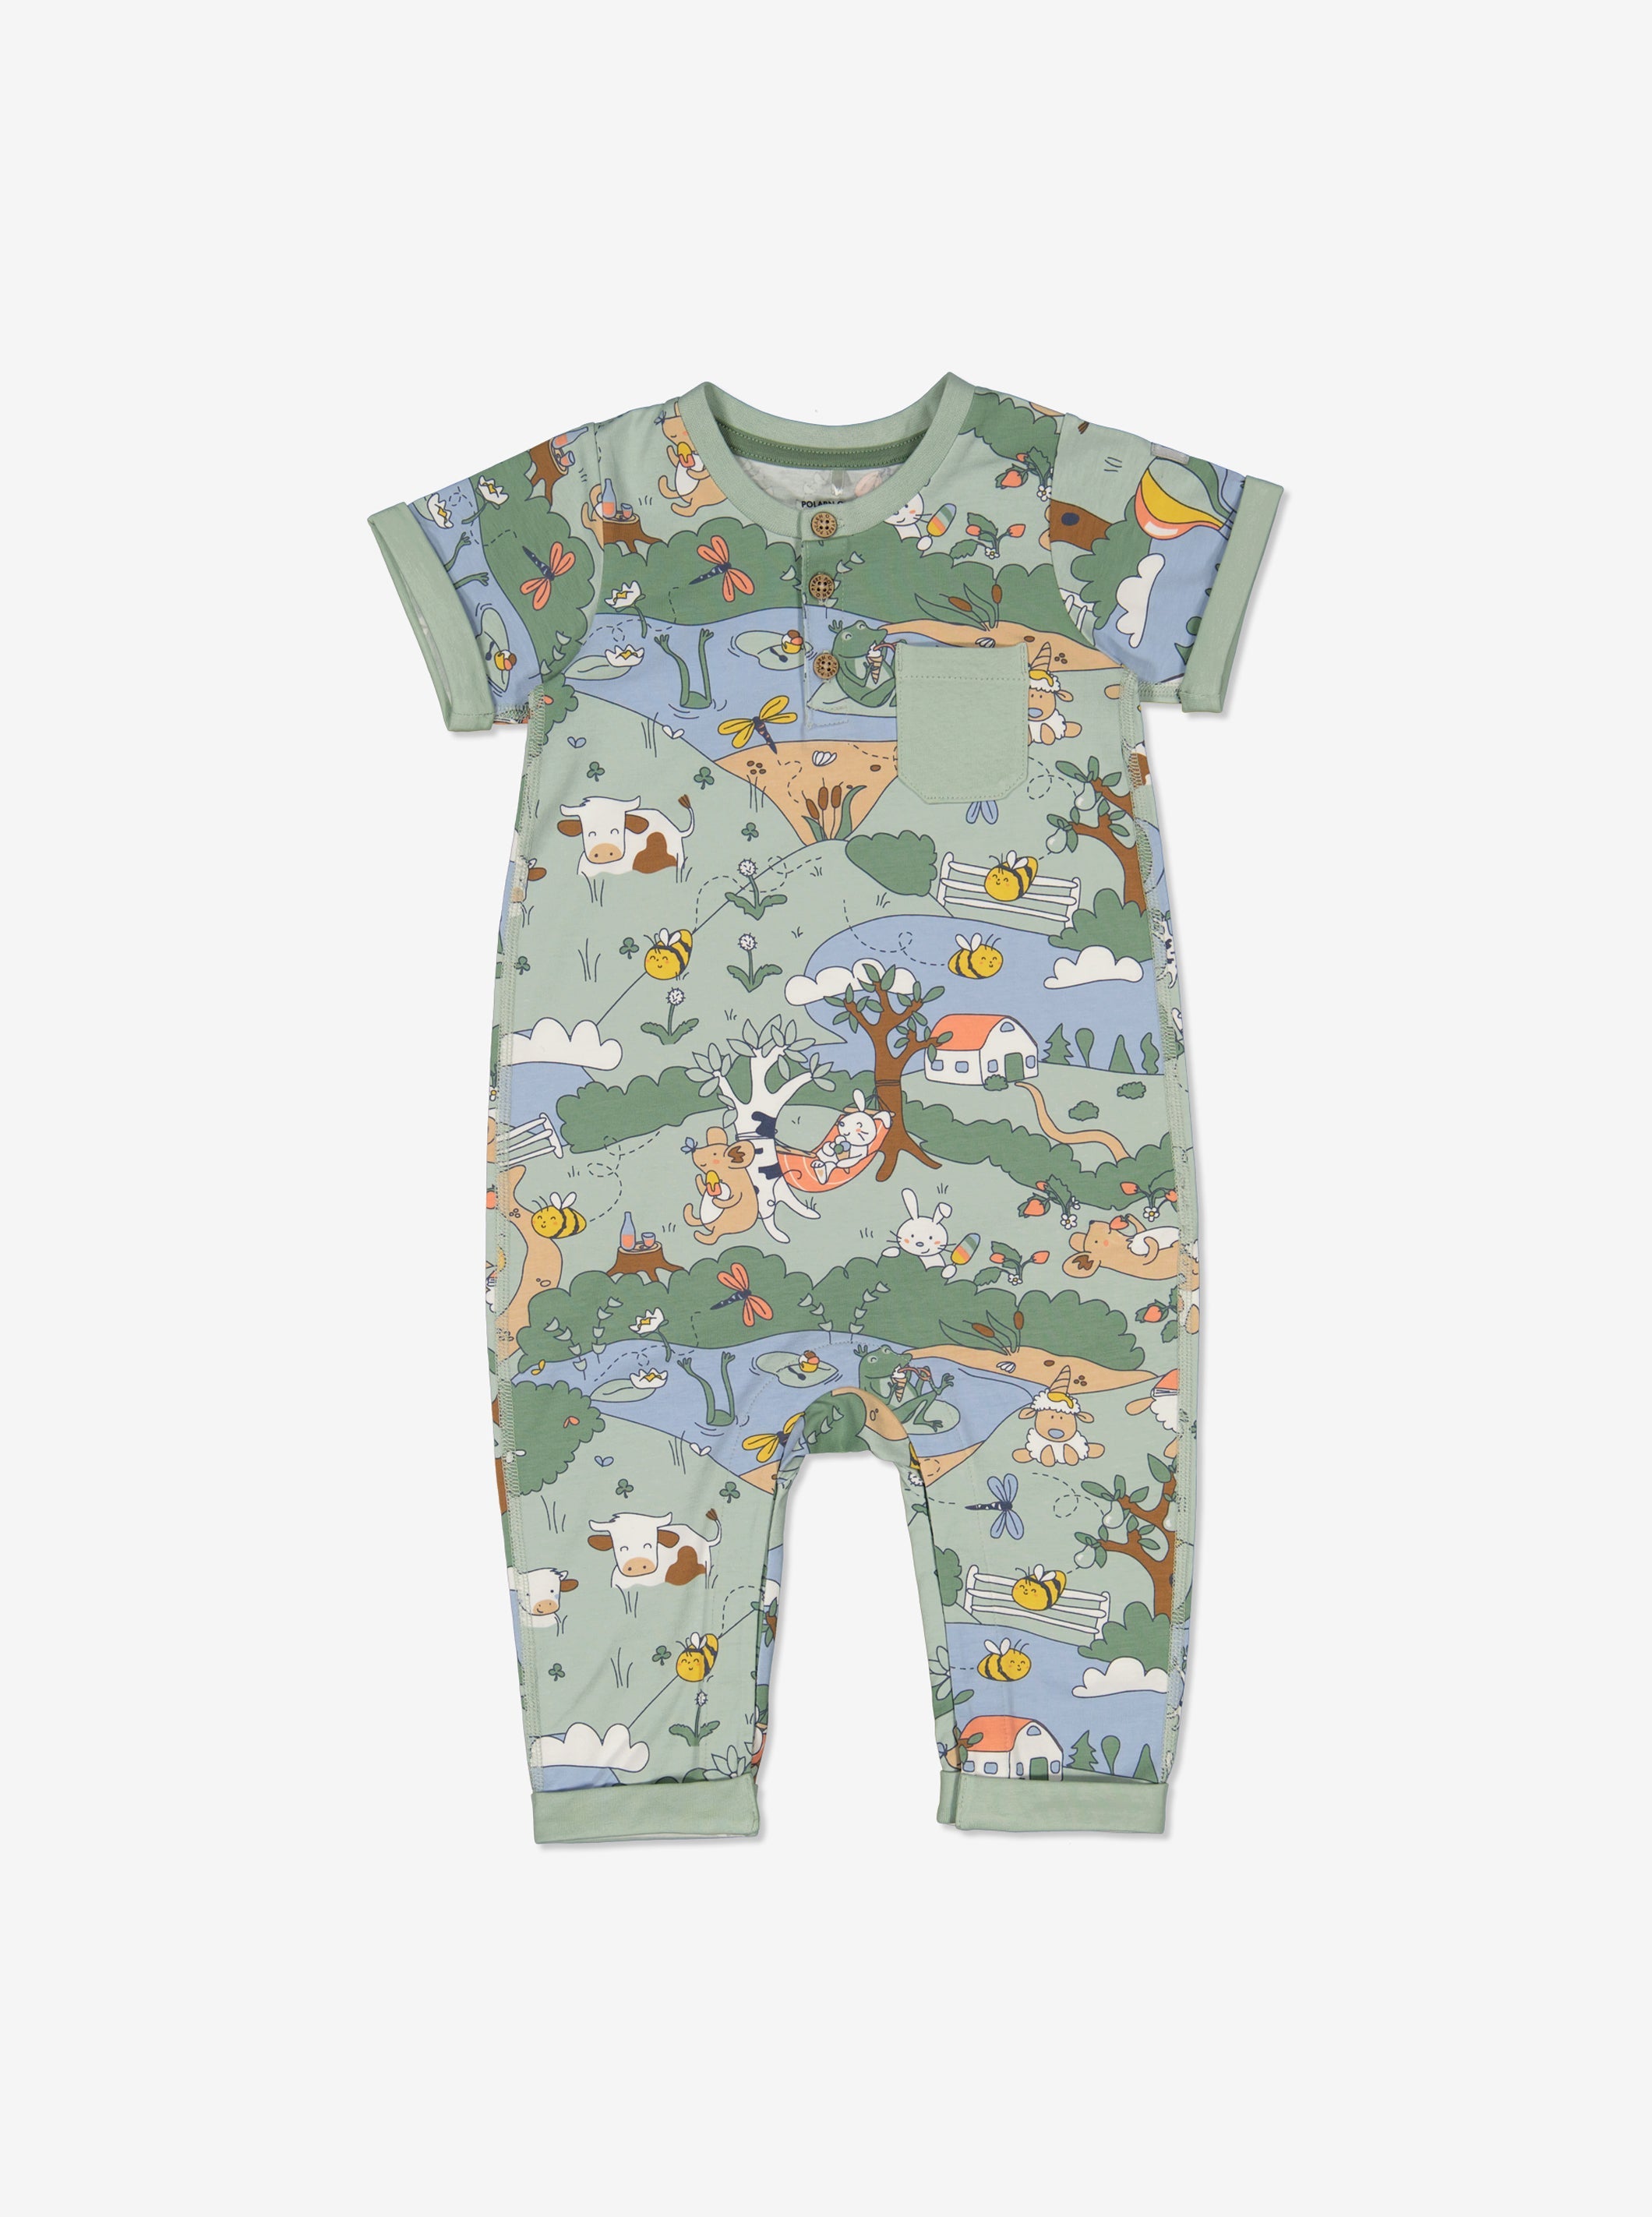 Countryside Print Baby Romper